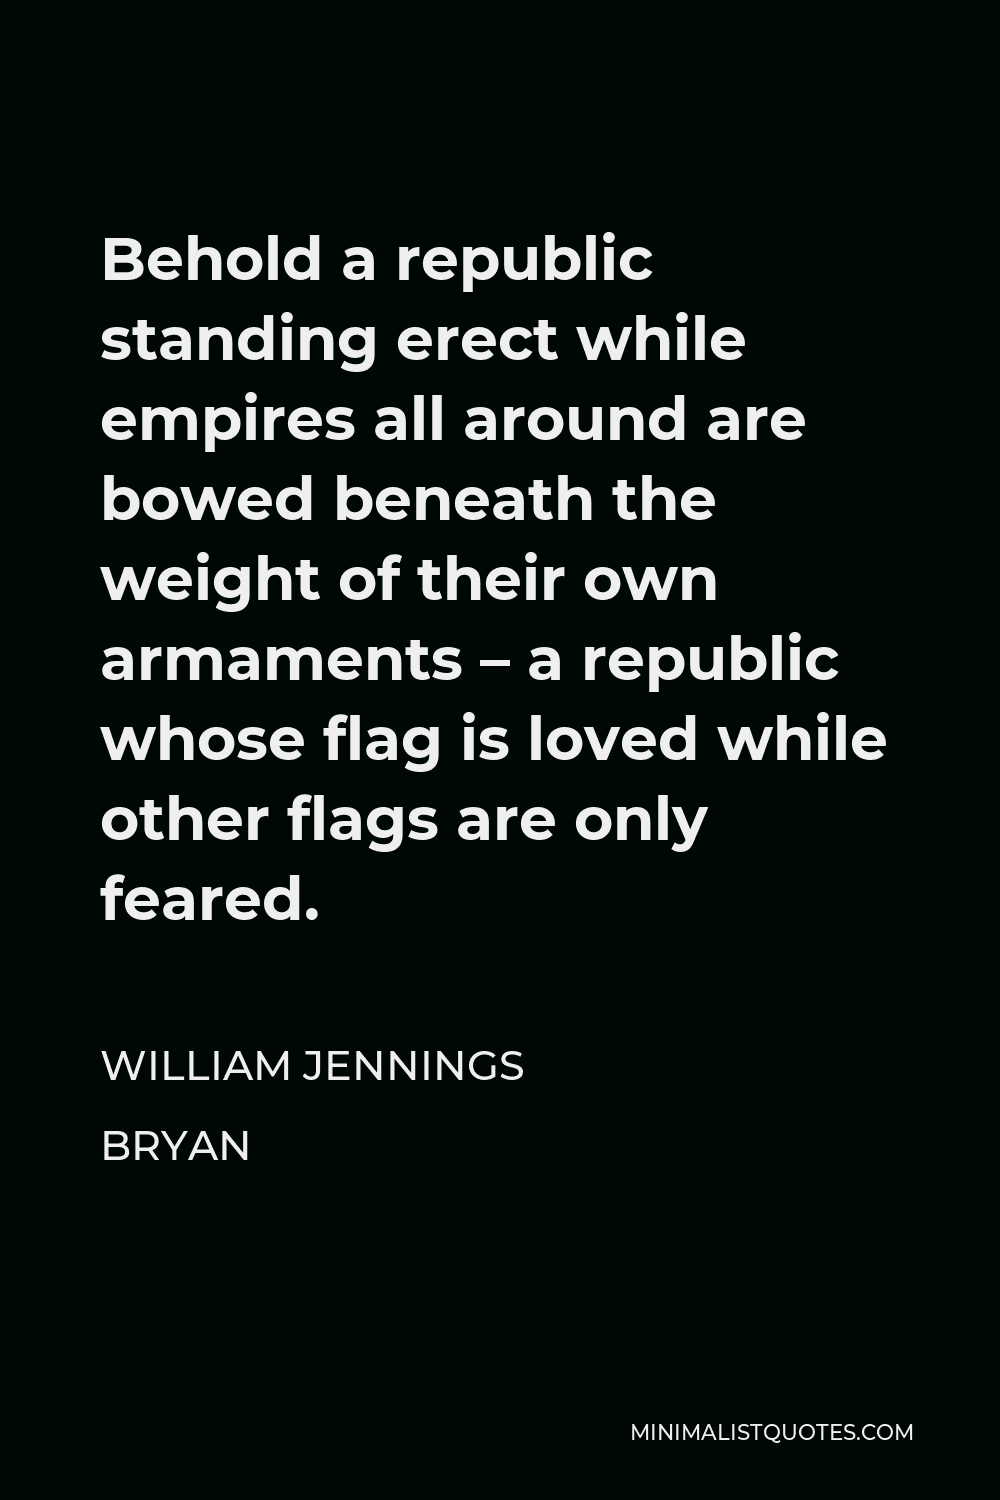 William Jennings Bryan Quote - Behold a republic standing erect while empires all around are bowed beneath the weight of their own armaments – a republic whose flag is loved while other flags are only feared.